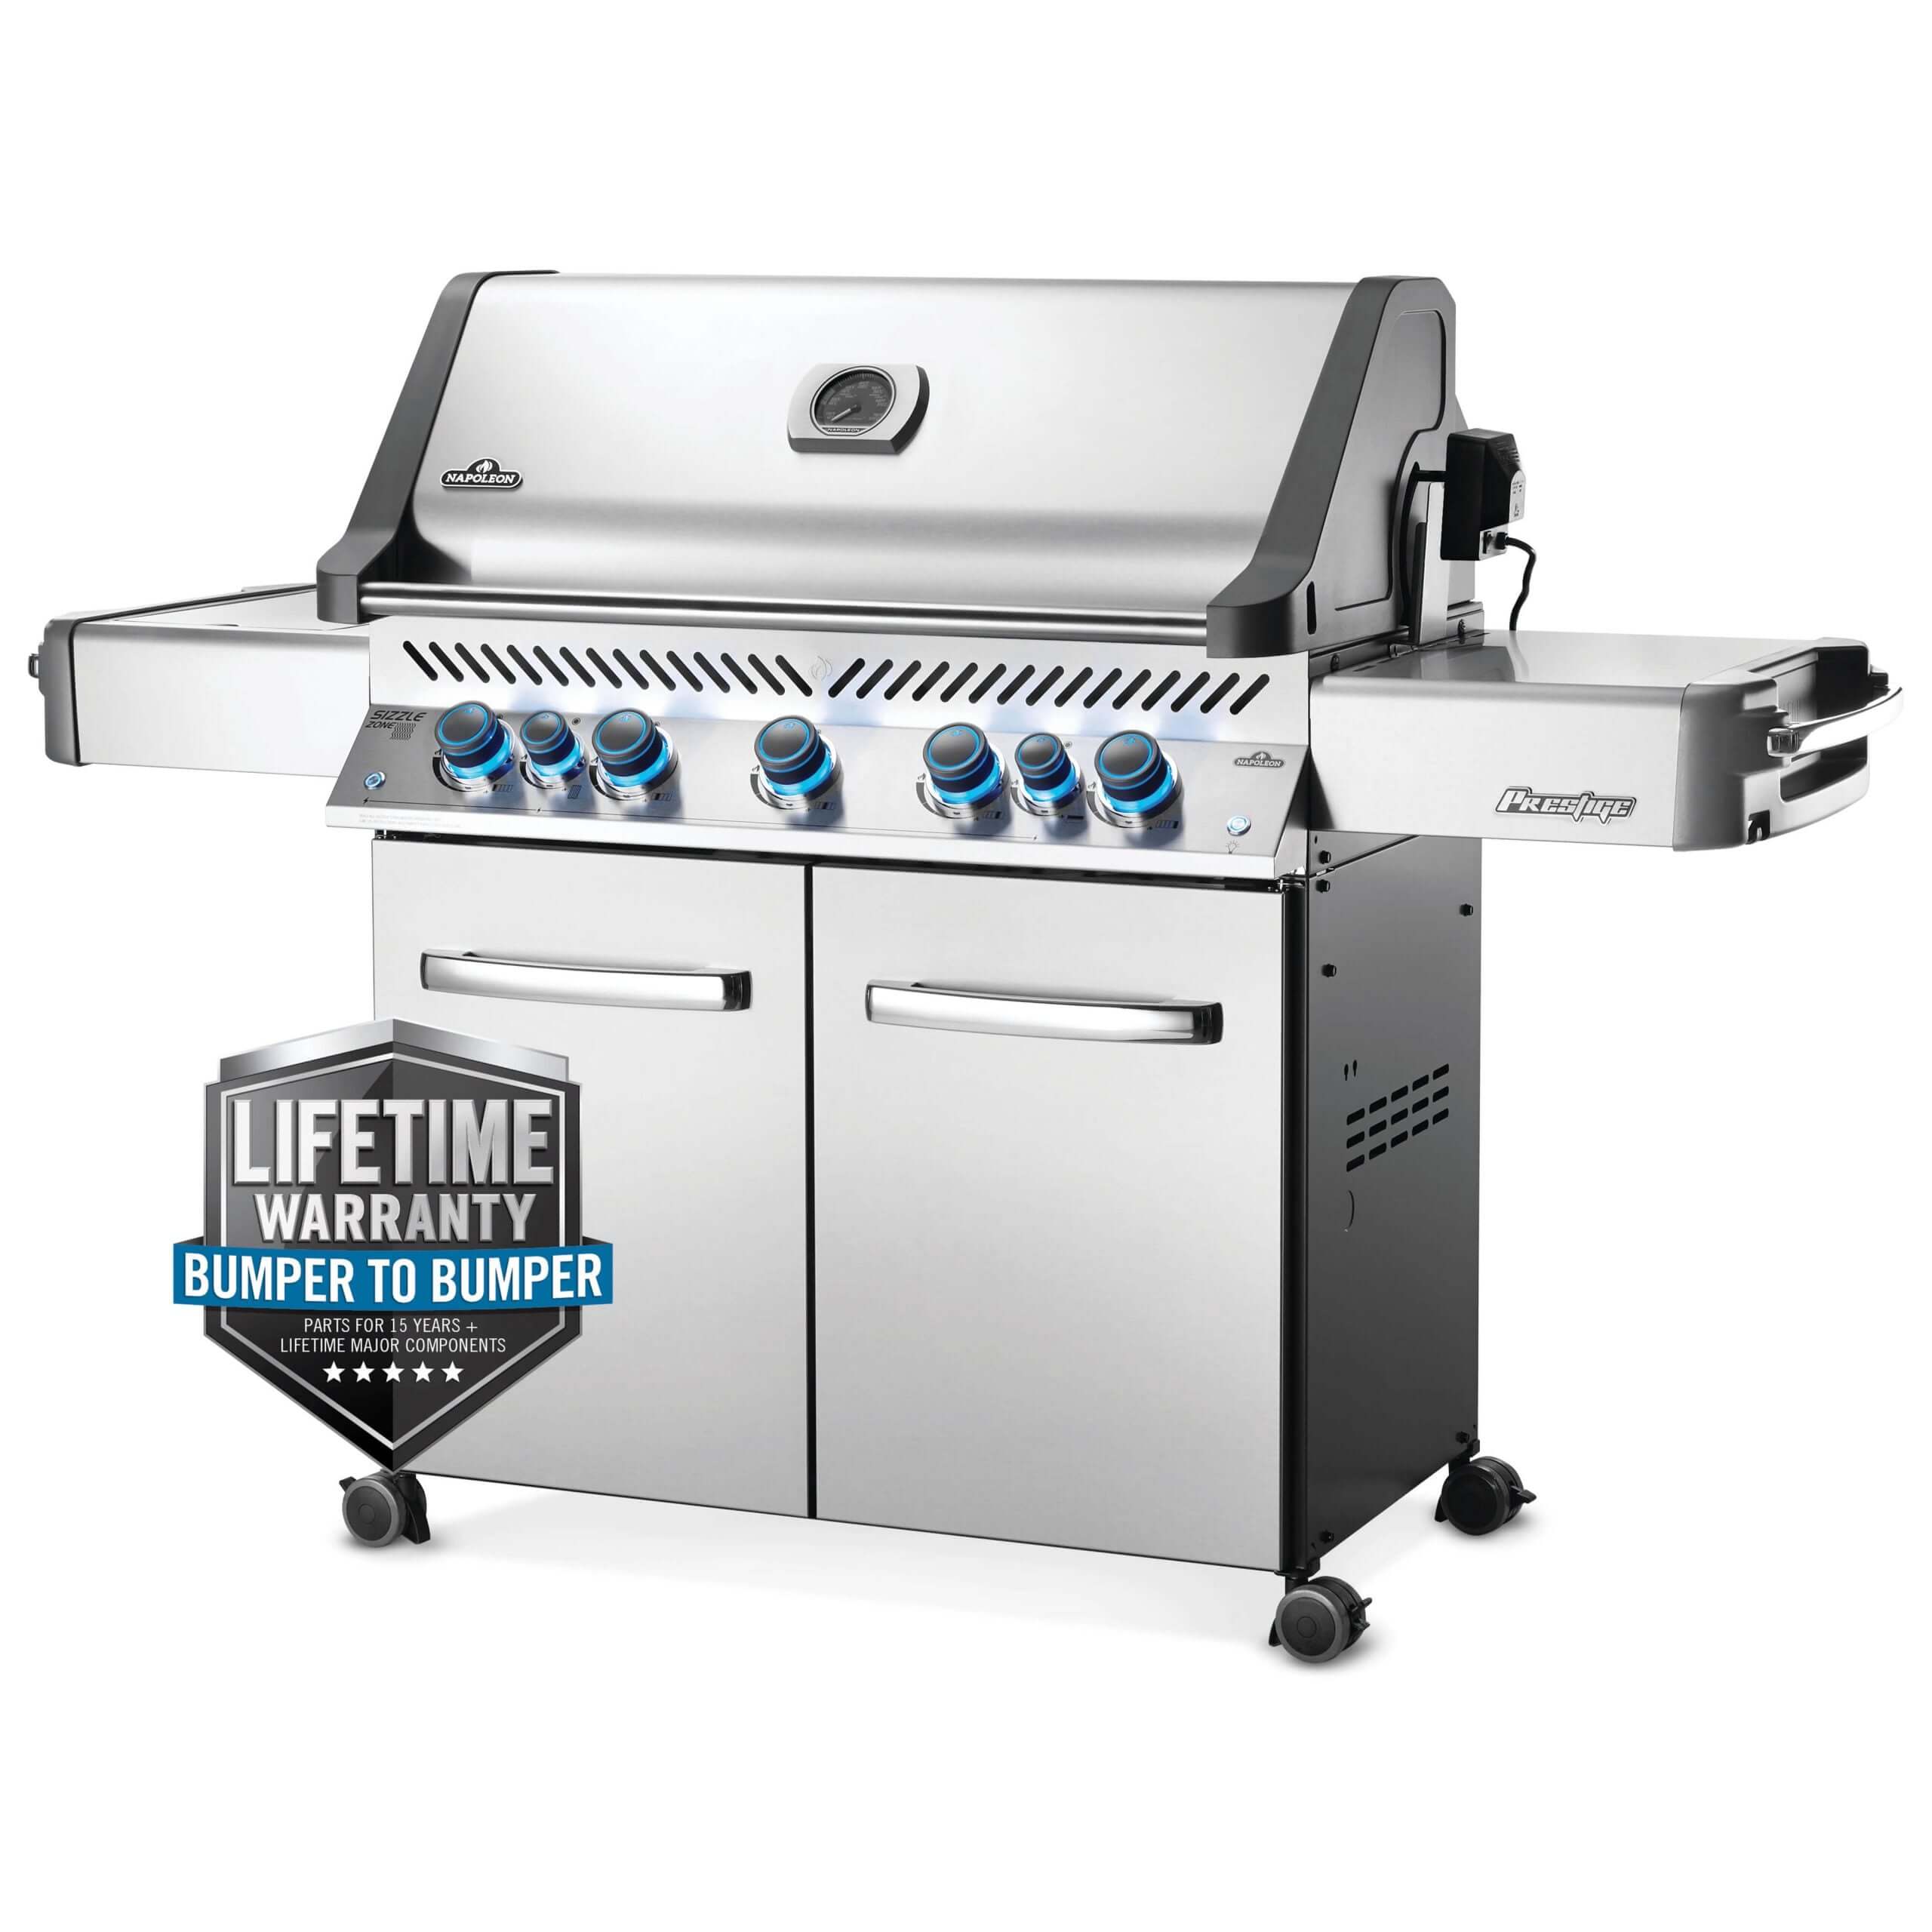 Napoleon Prestige 665 Freestanding Gas Grill with Infrared Rear Burner and Infrared Side Burner and Rotisserie Kit